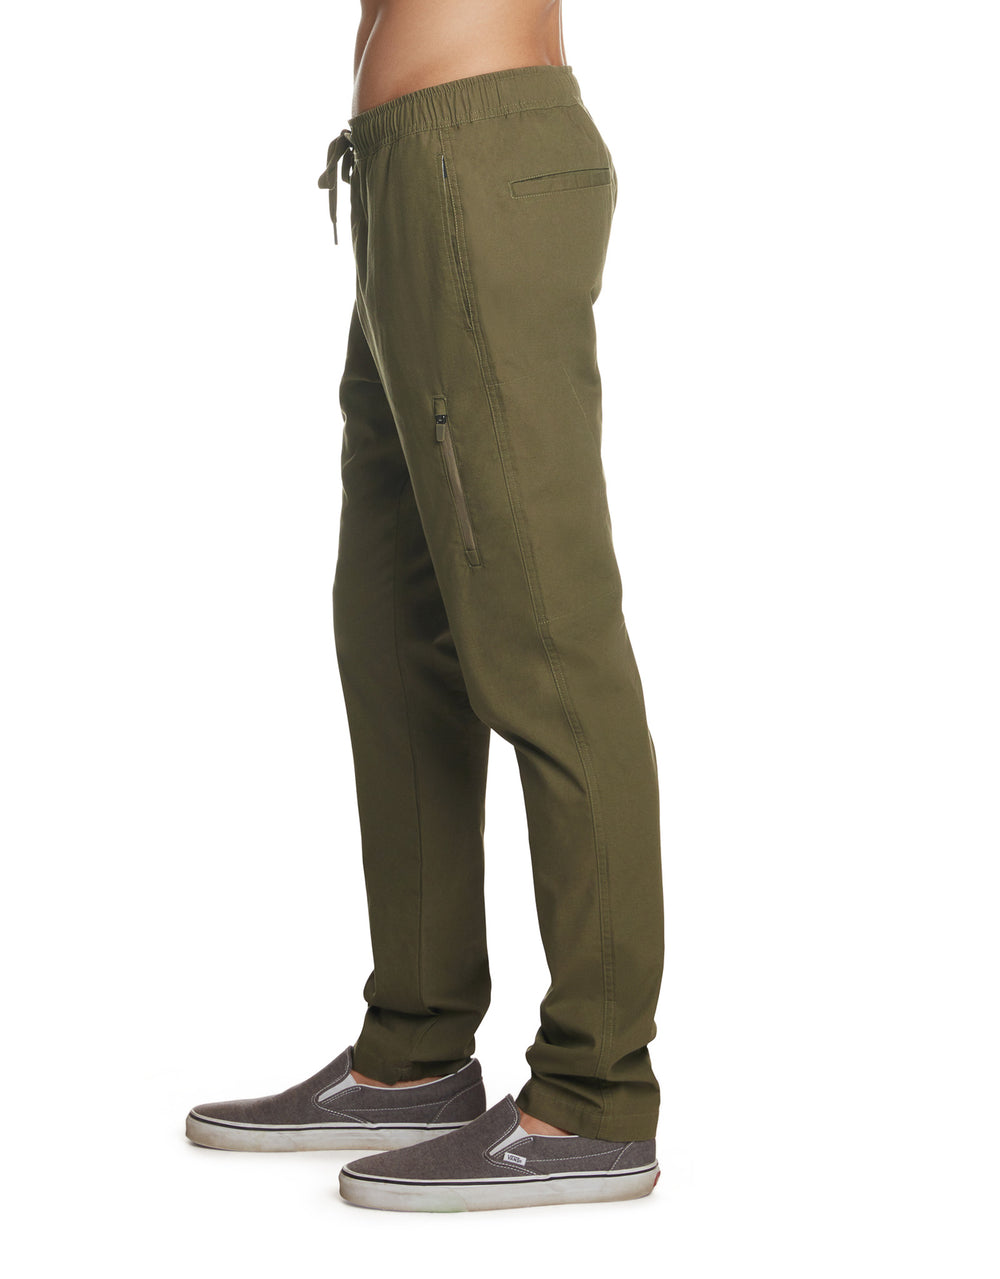 Explorin' Freely Pant - Military Green